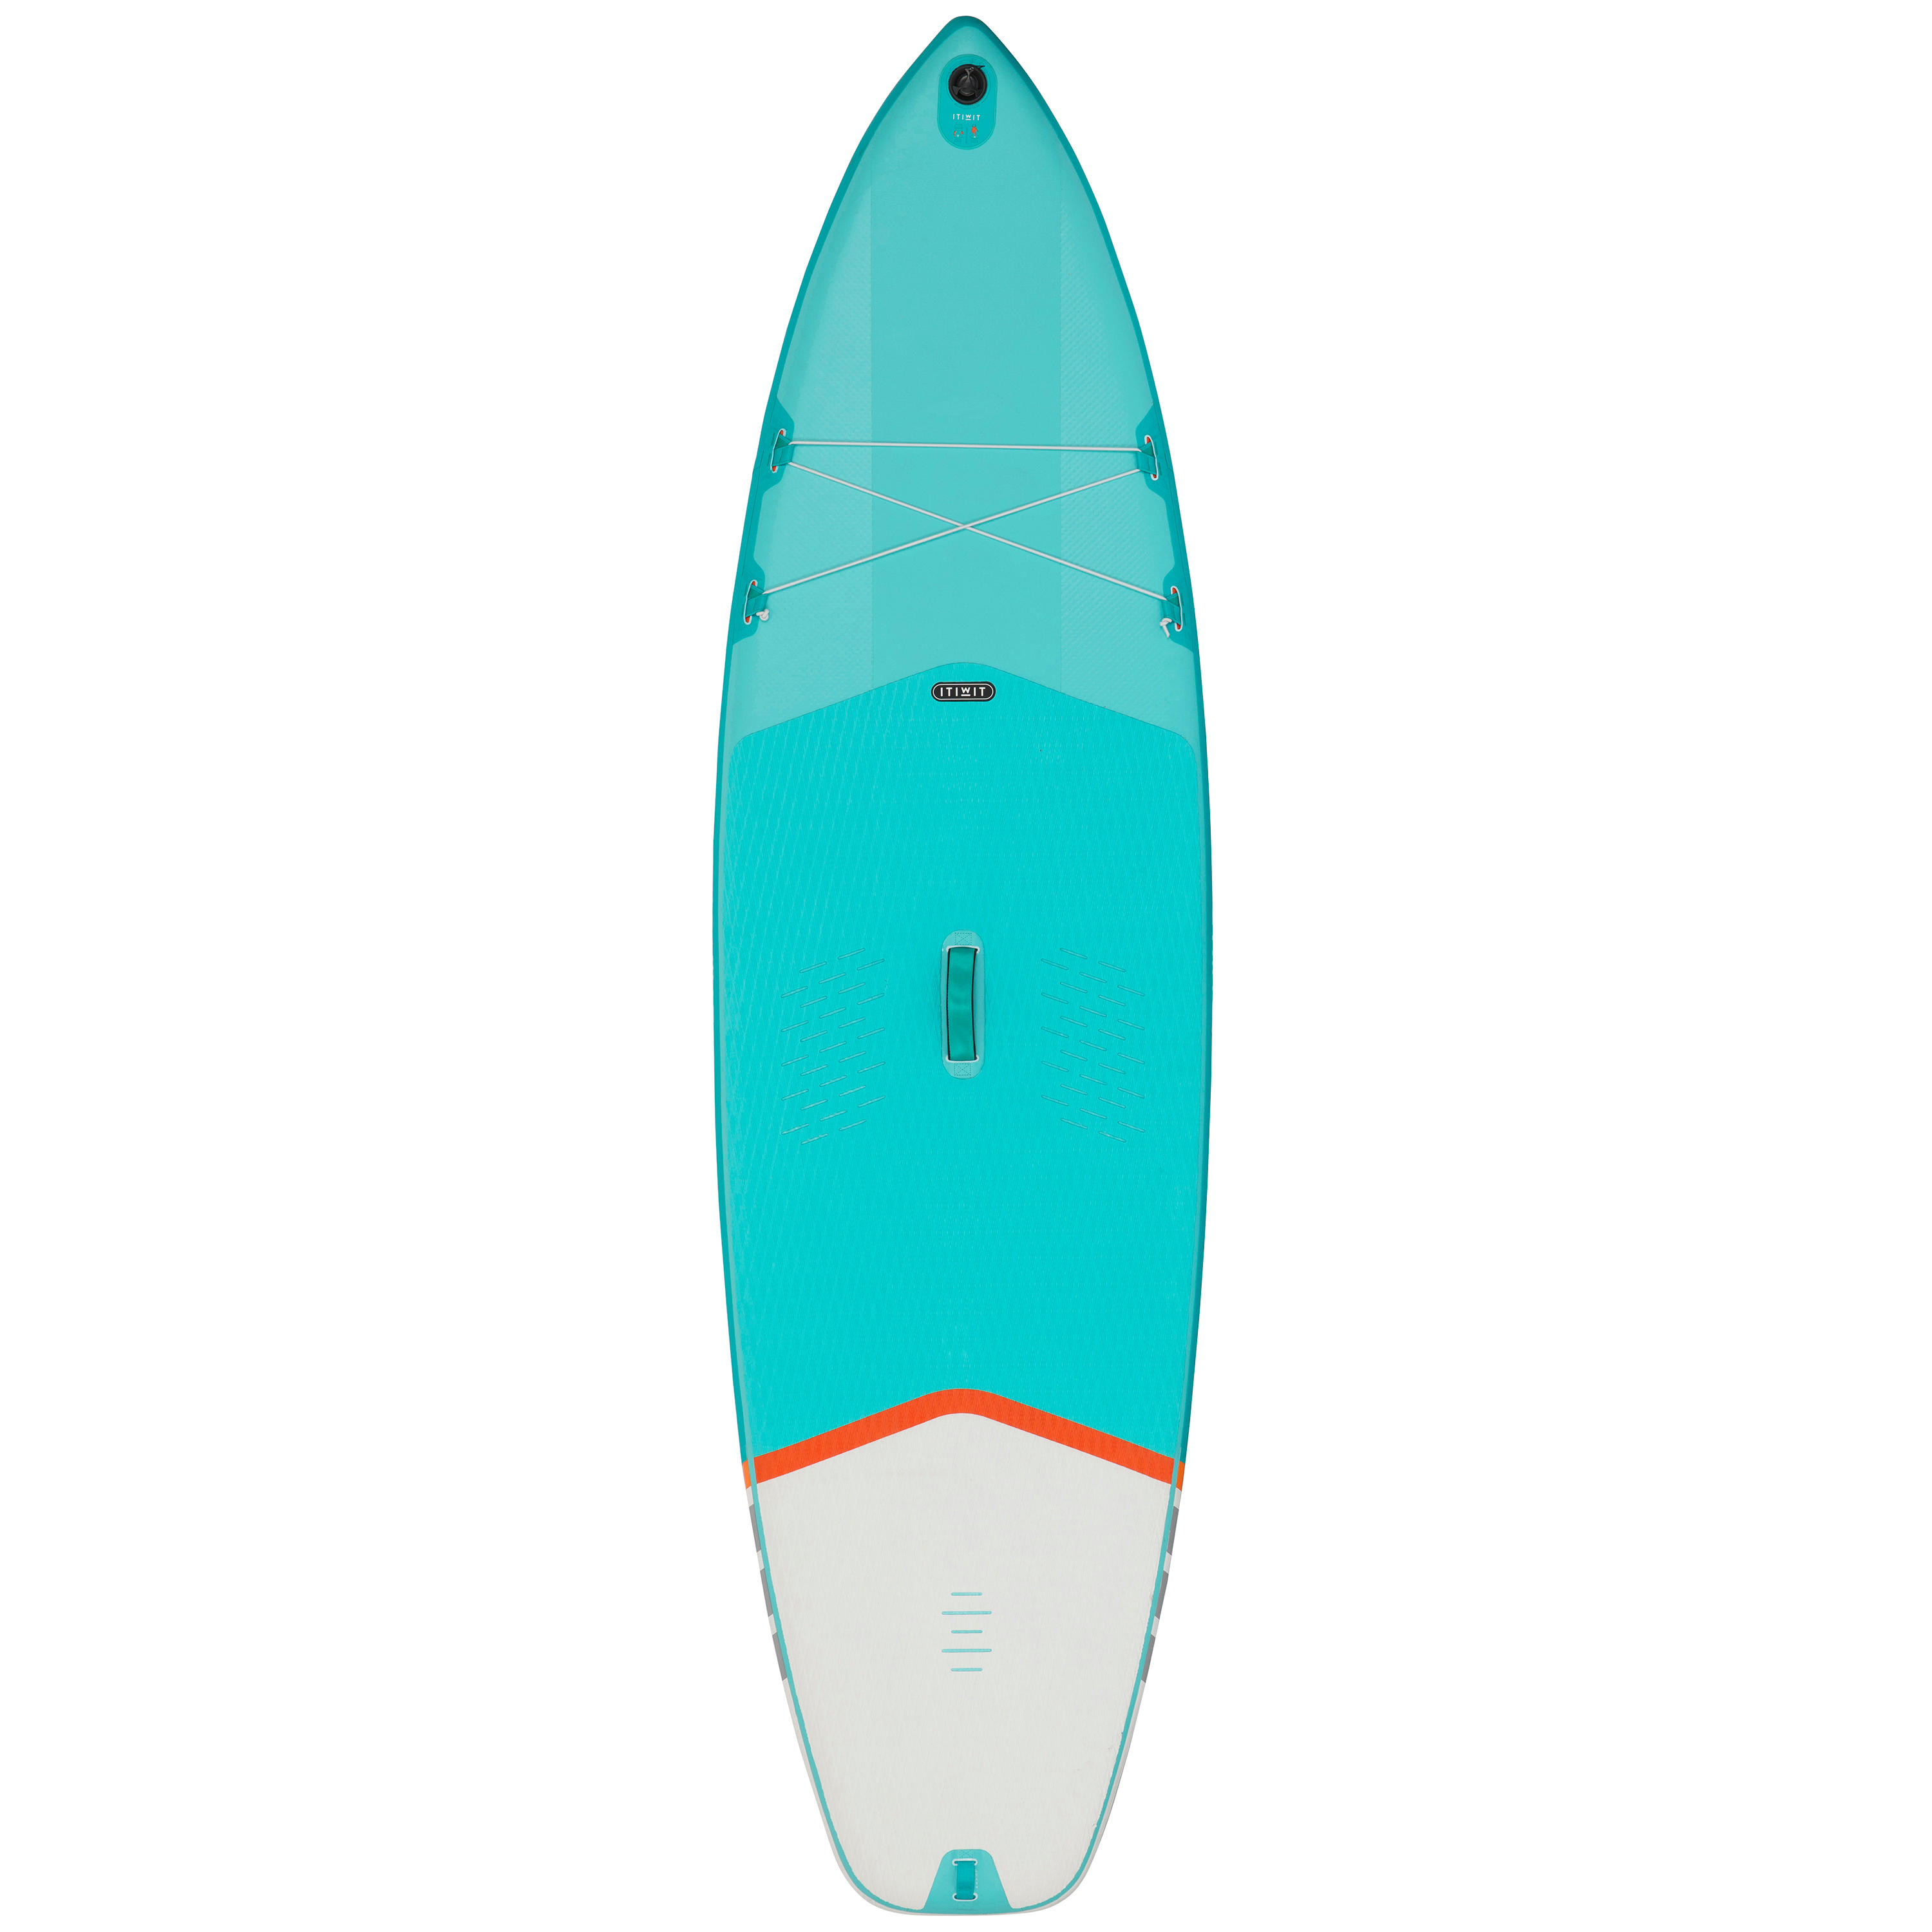 Tool-Free Inflatable Paddle Board Fin - X100 - ITIWIT